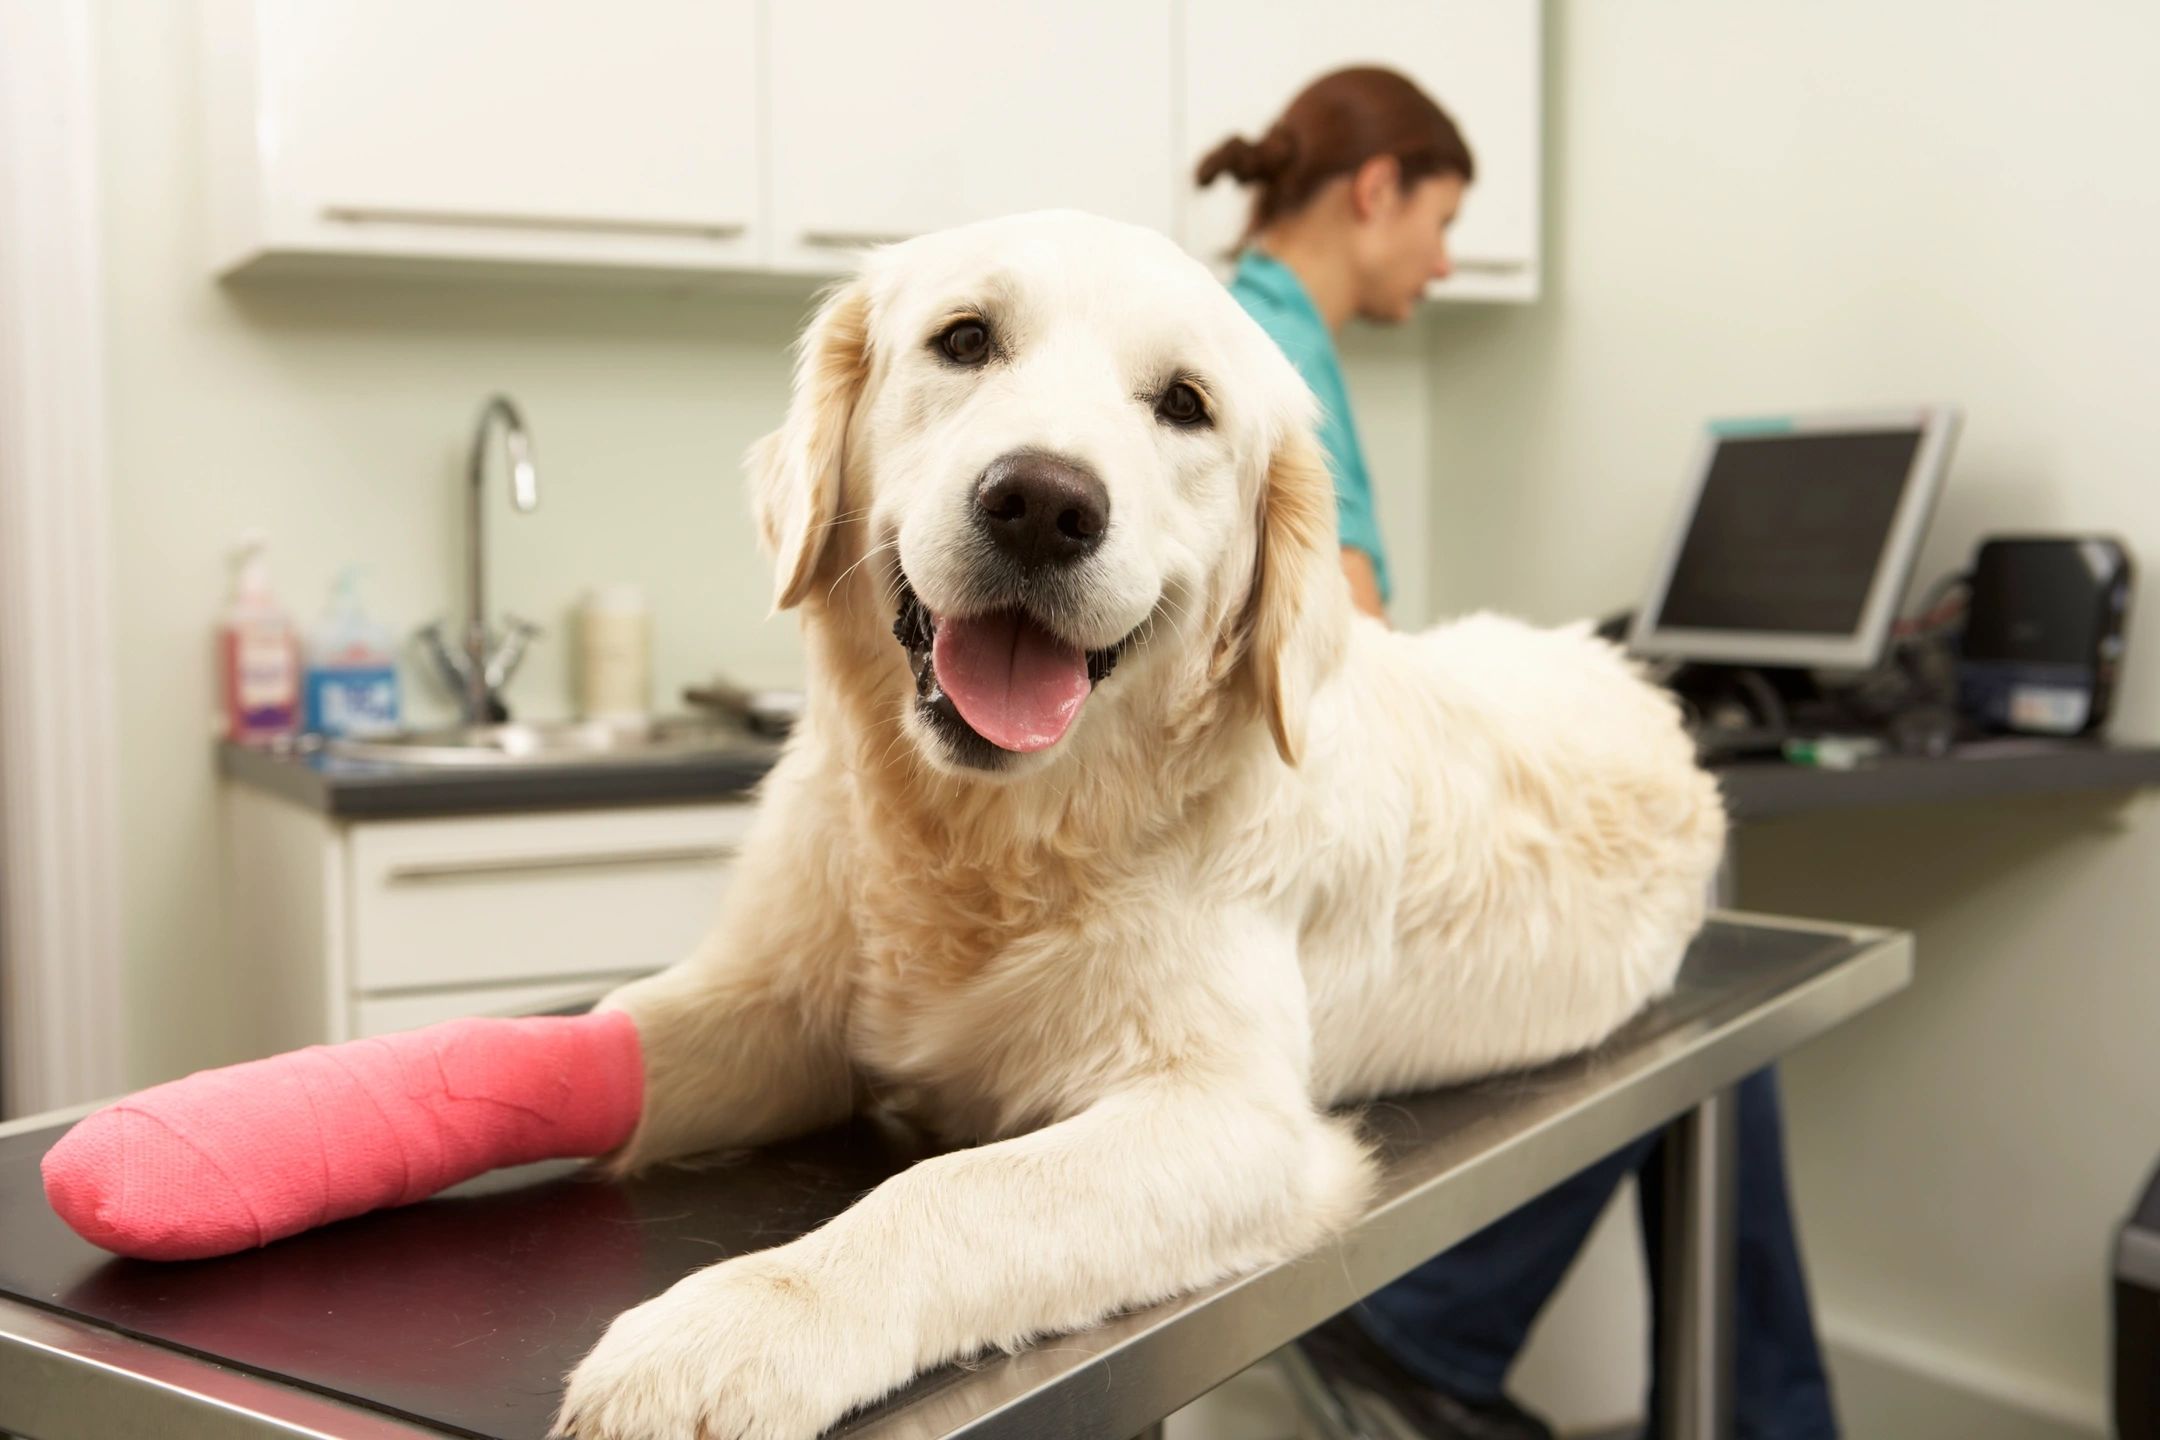 Dog with a pink cast on its right front paw